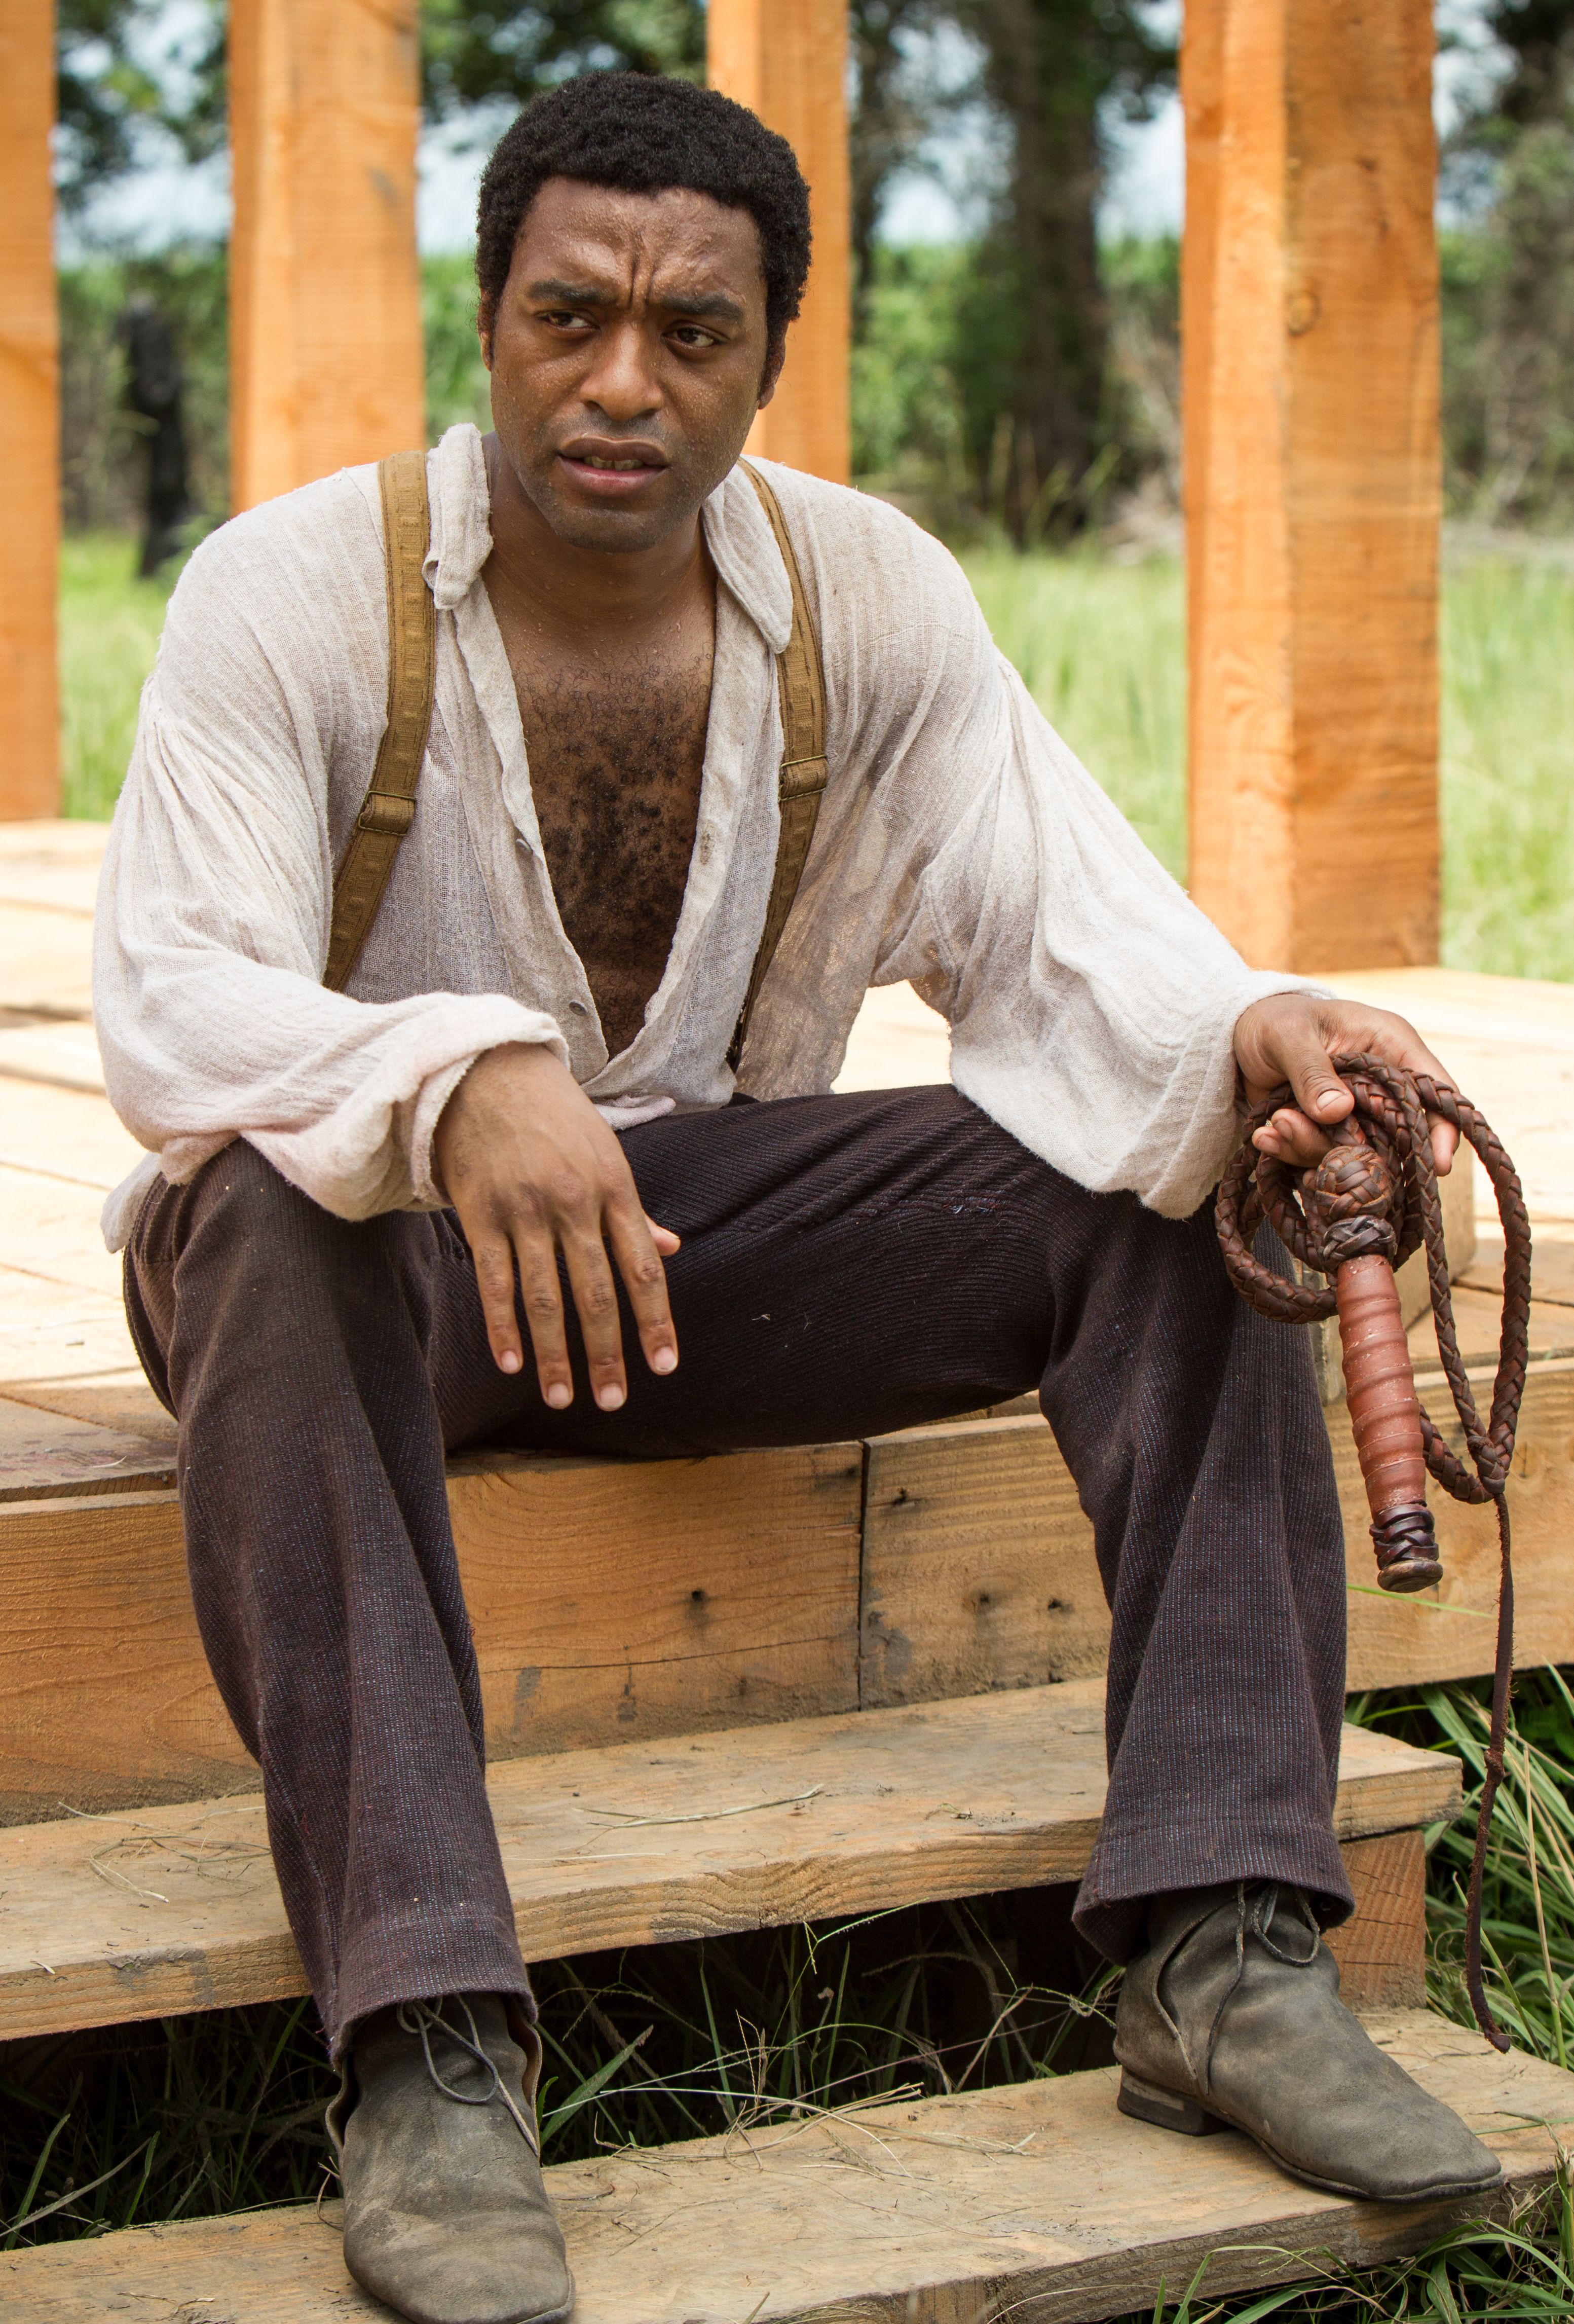 Solomon Northup with a whip in his hand